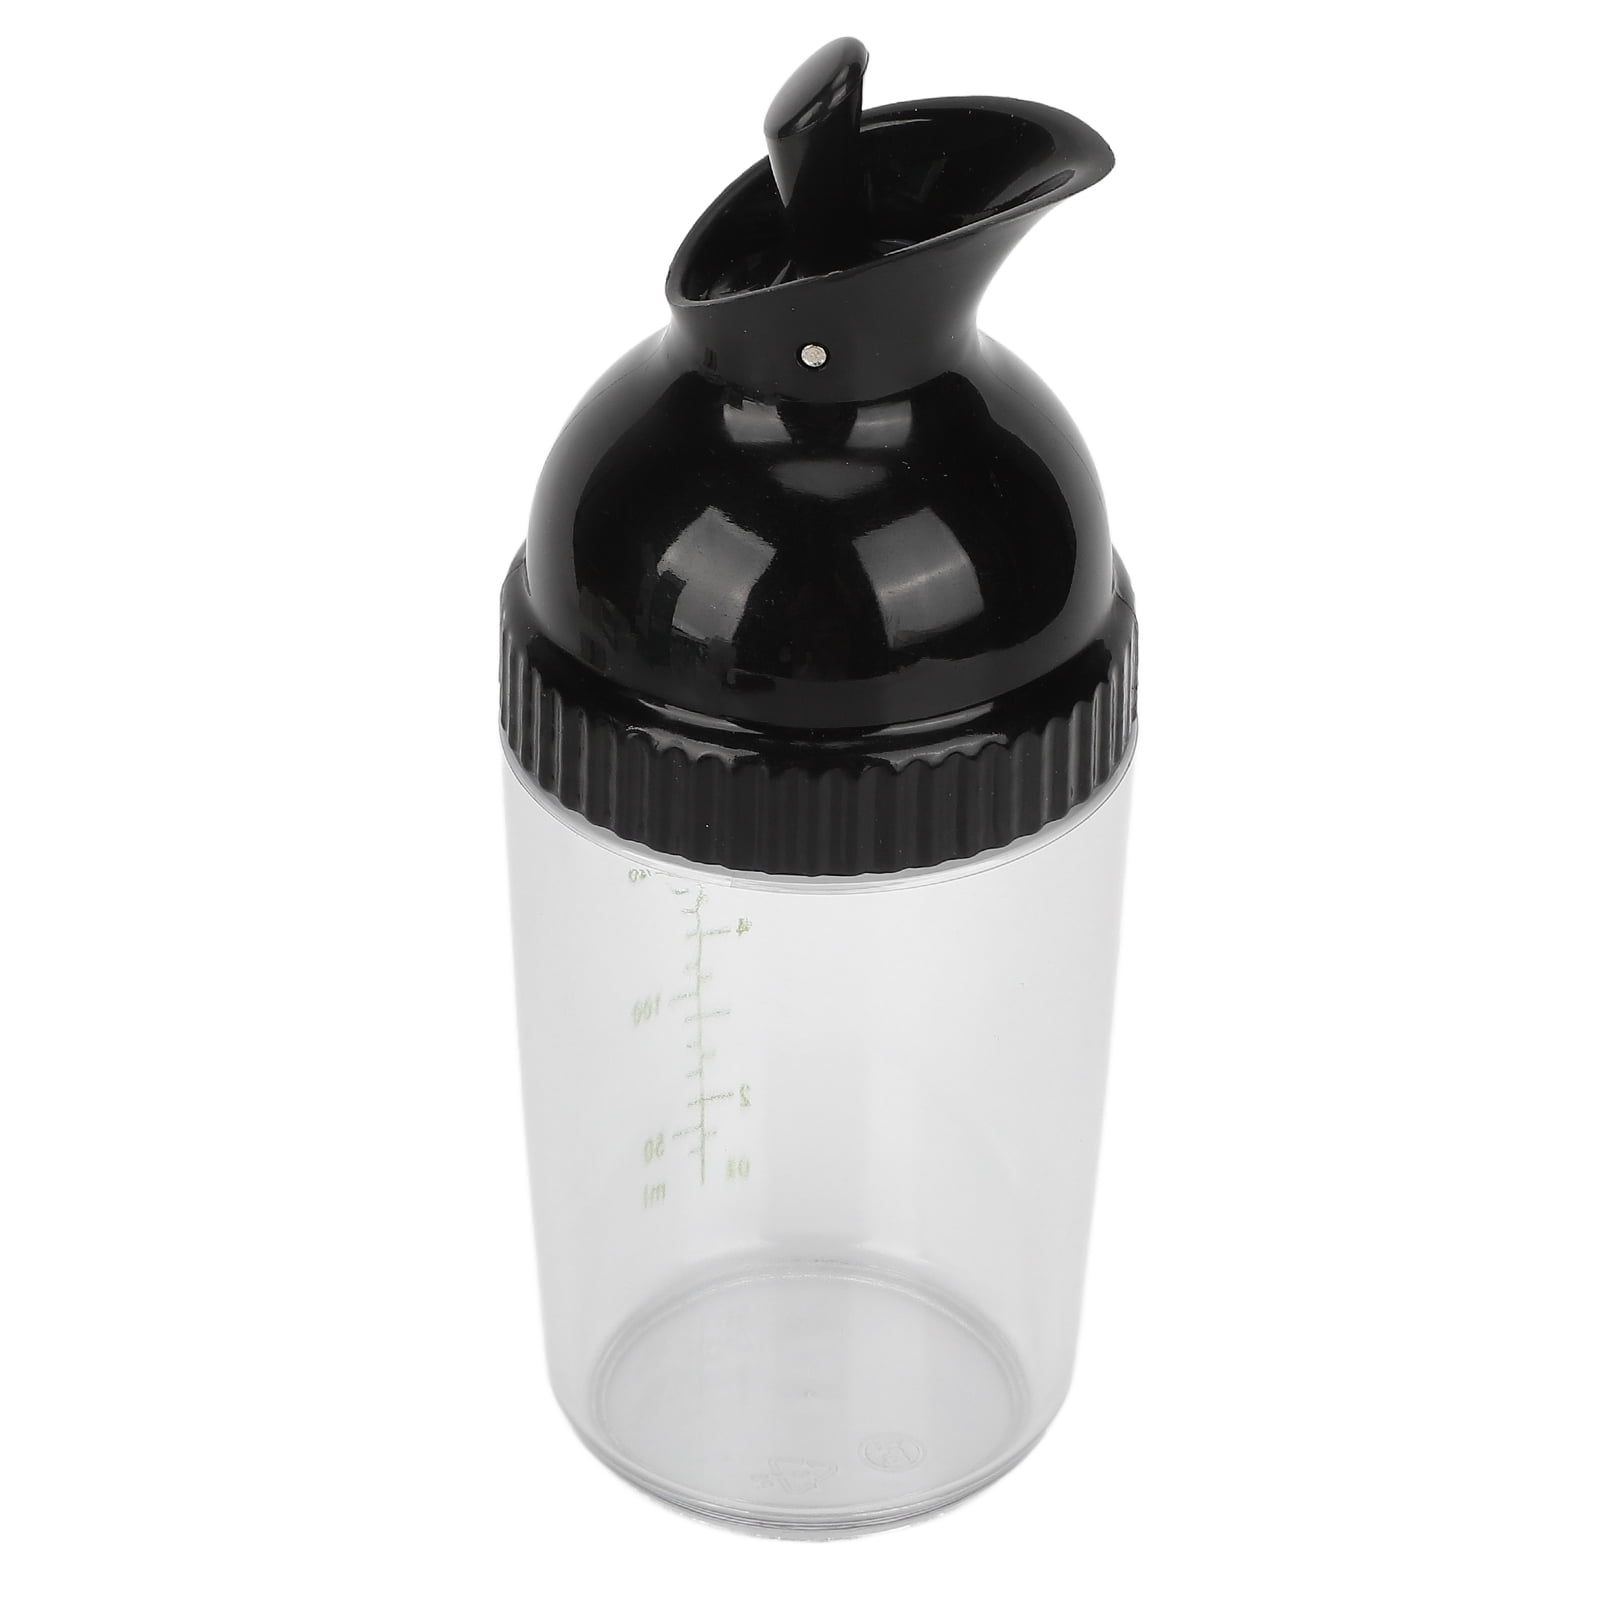 Ymiko Salad Dressing Container, Prevent Leakage Salad Dressing